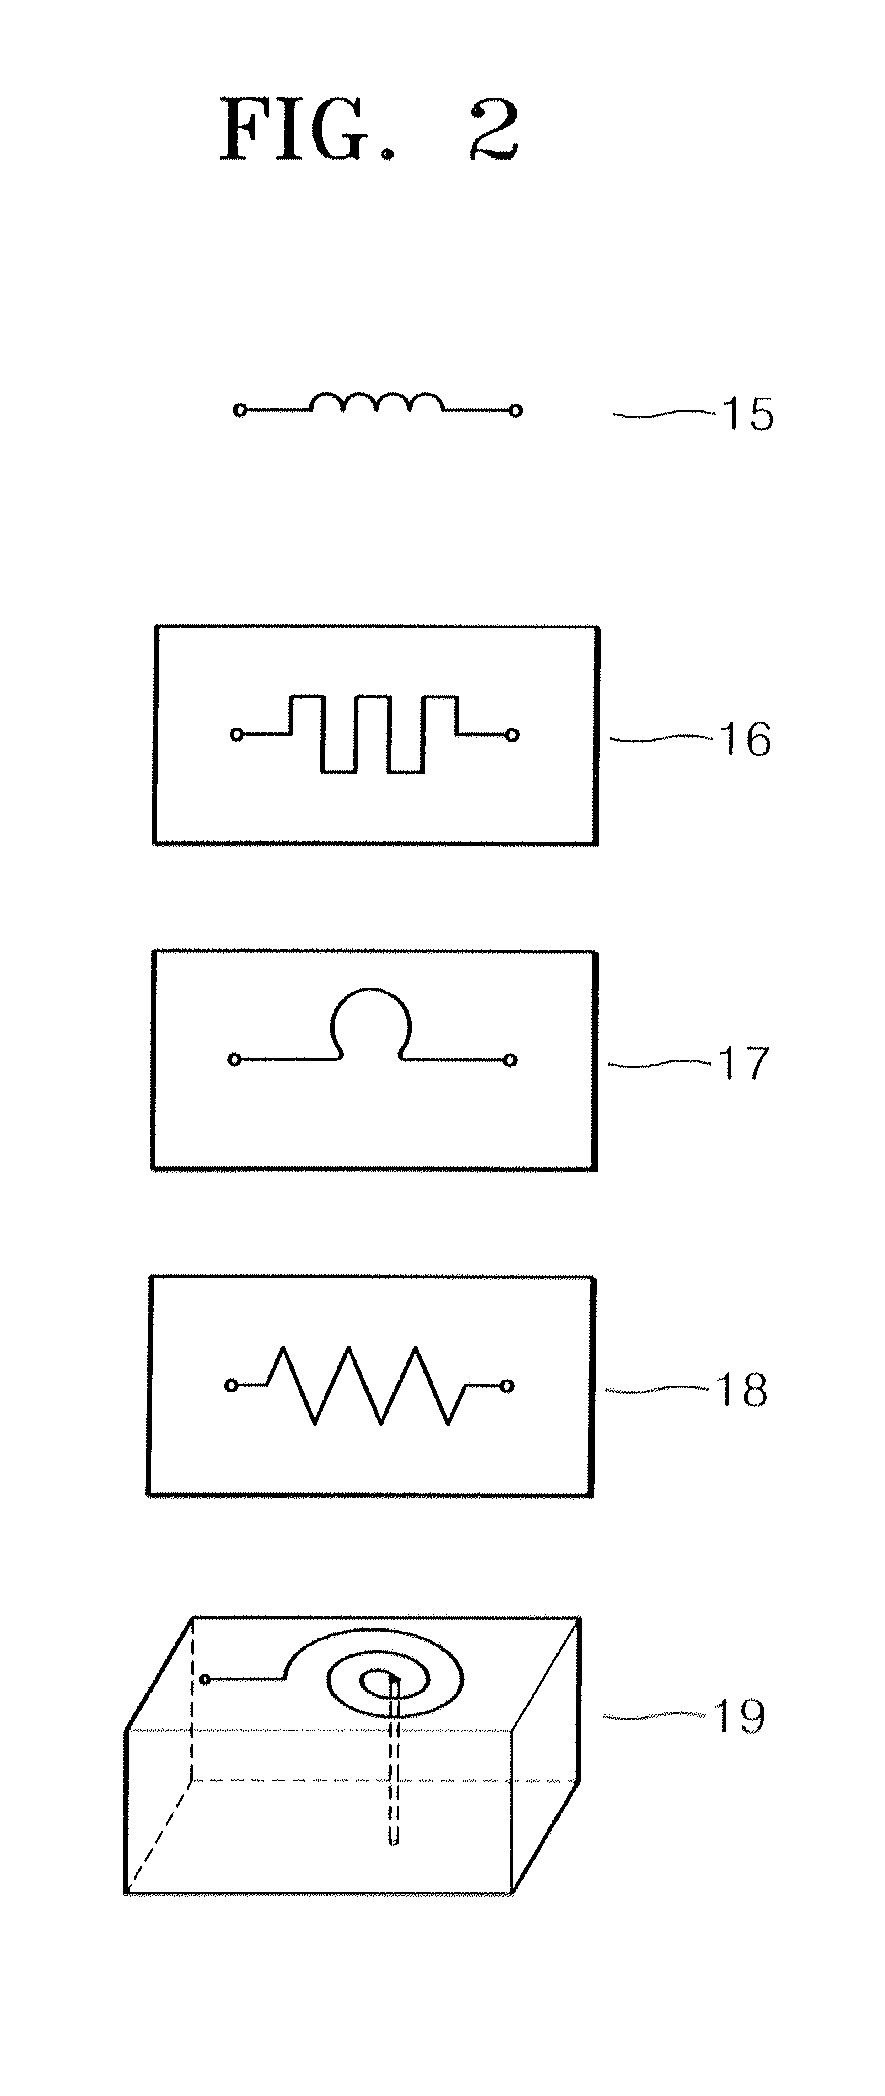 Semiconductor package to remove power noise using ground impedance